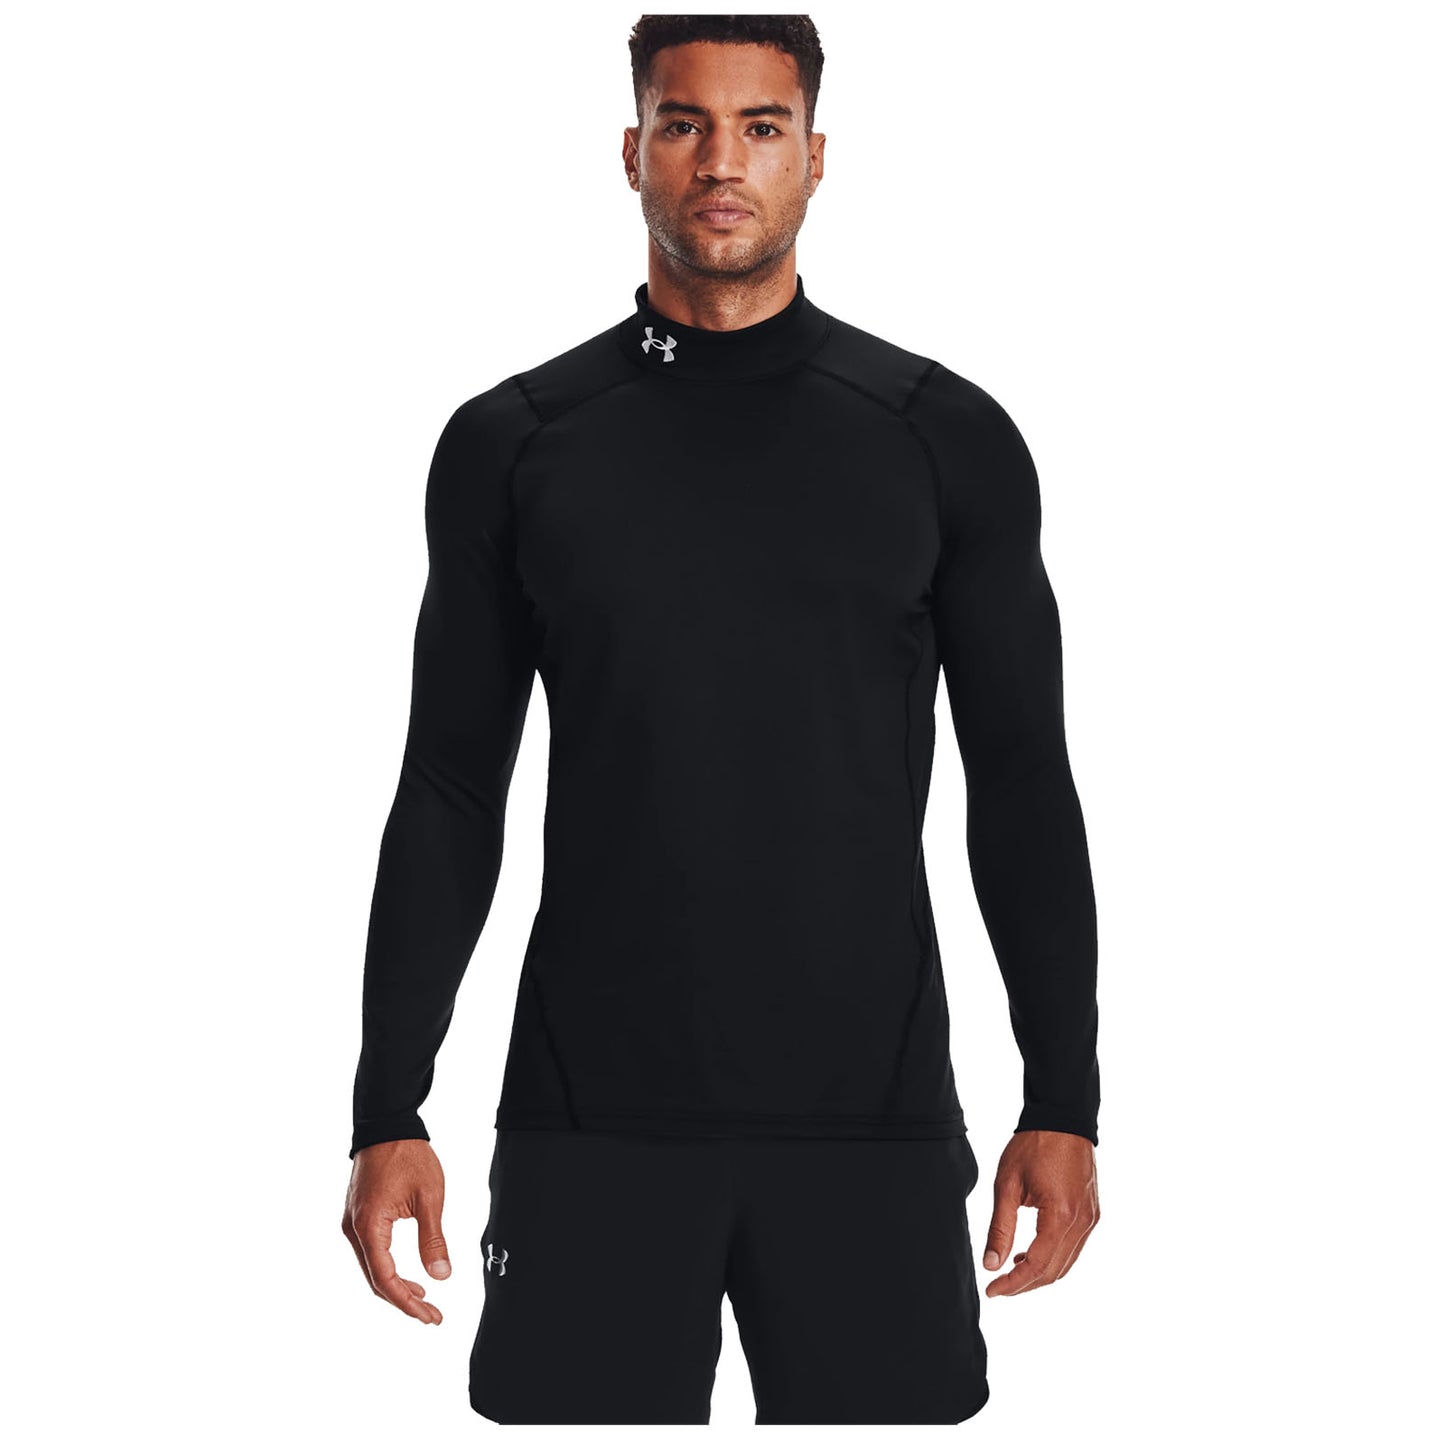 Under Armour Mens ColdGear Fitted Mock Top